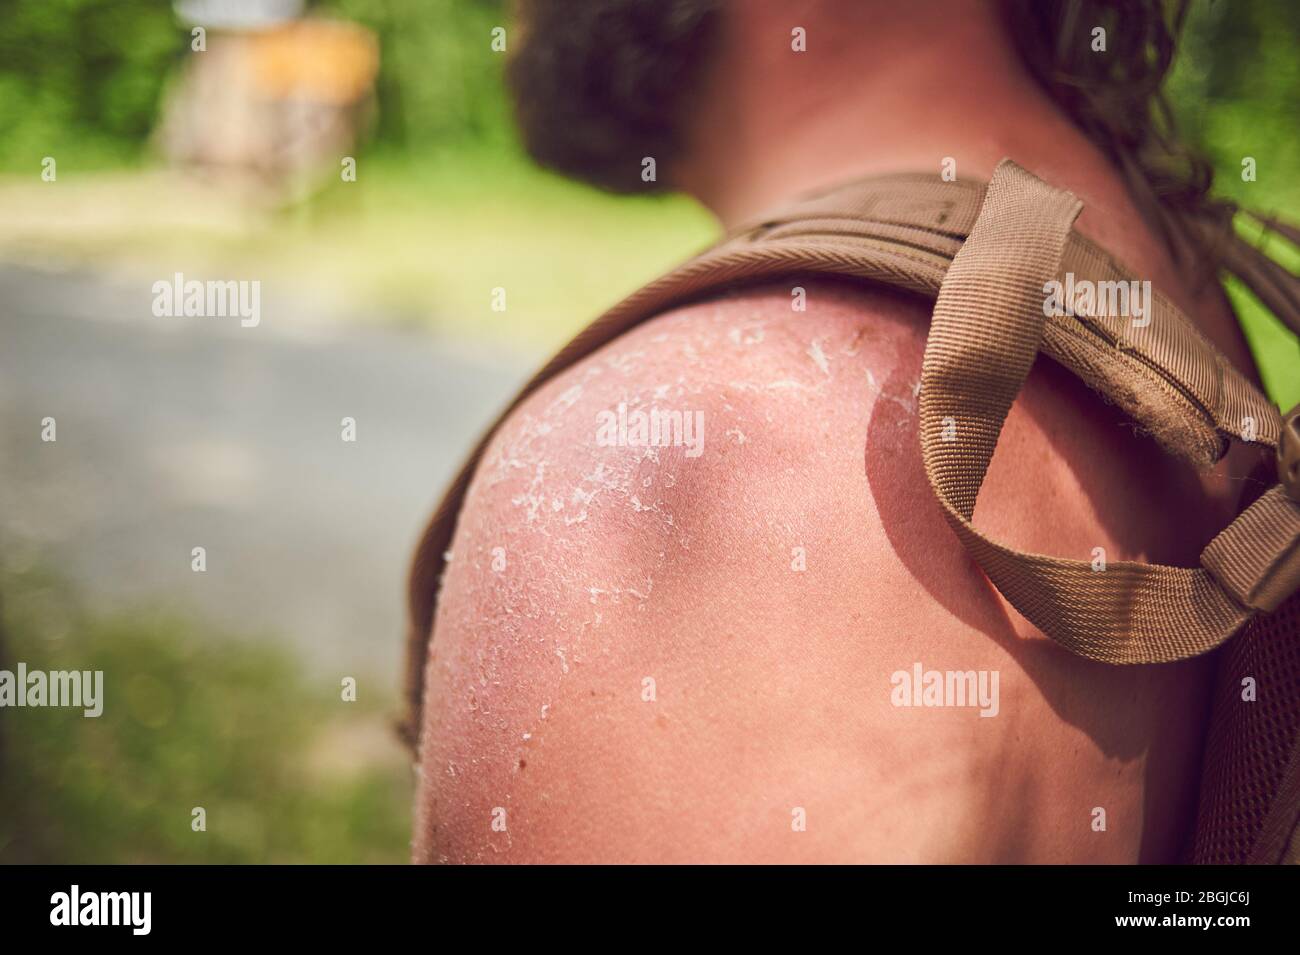 Male tourist did not use sunscreen and received a sunburn. Stock Photo